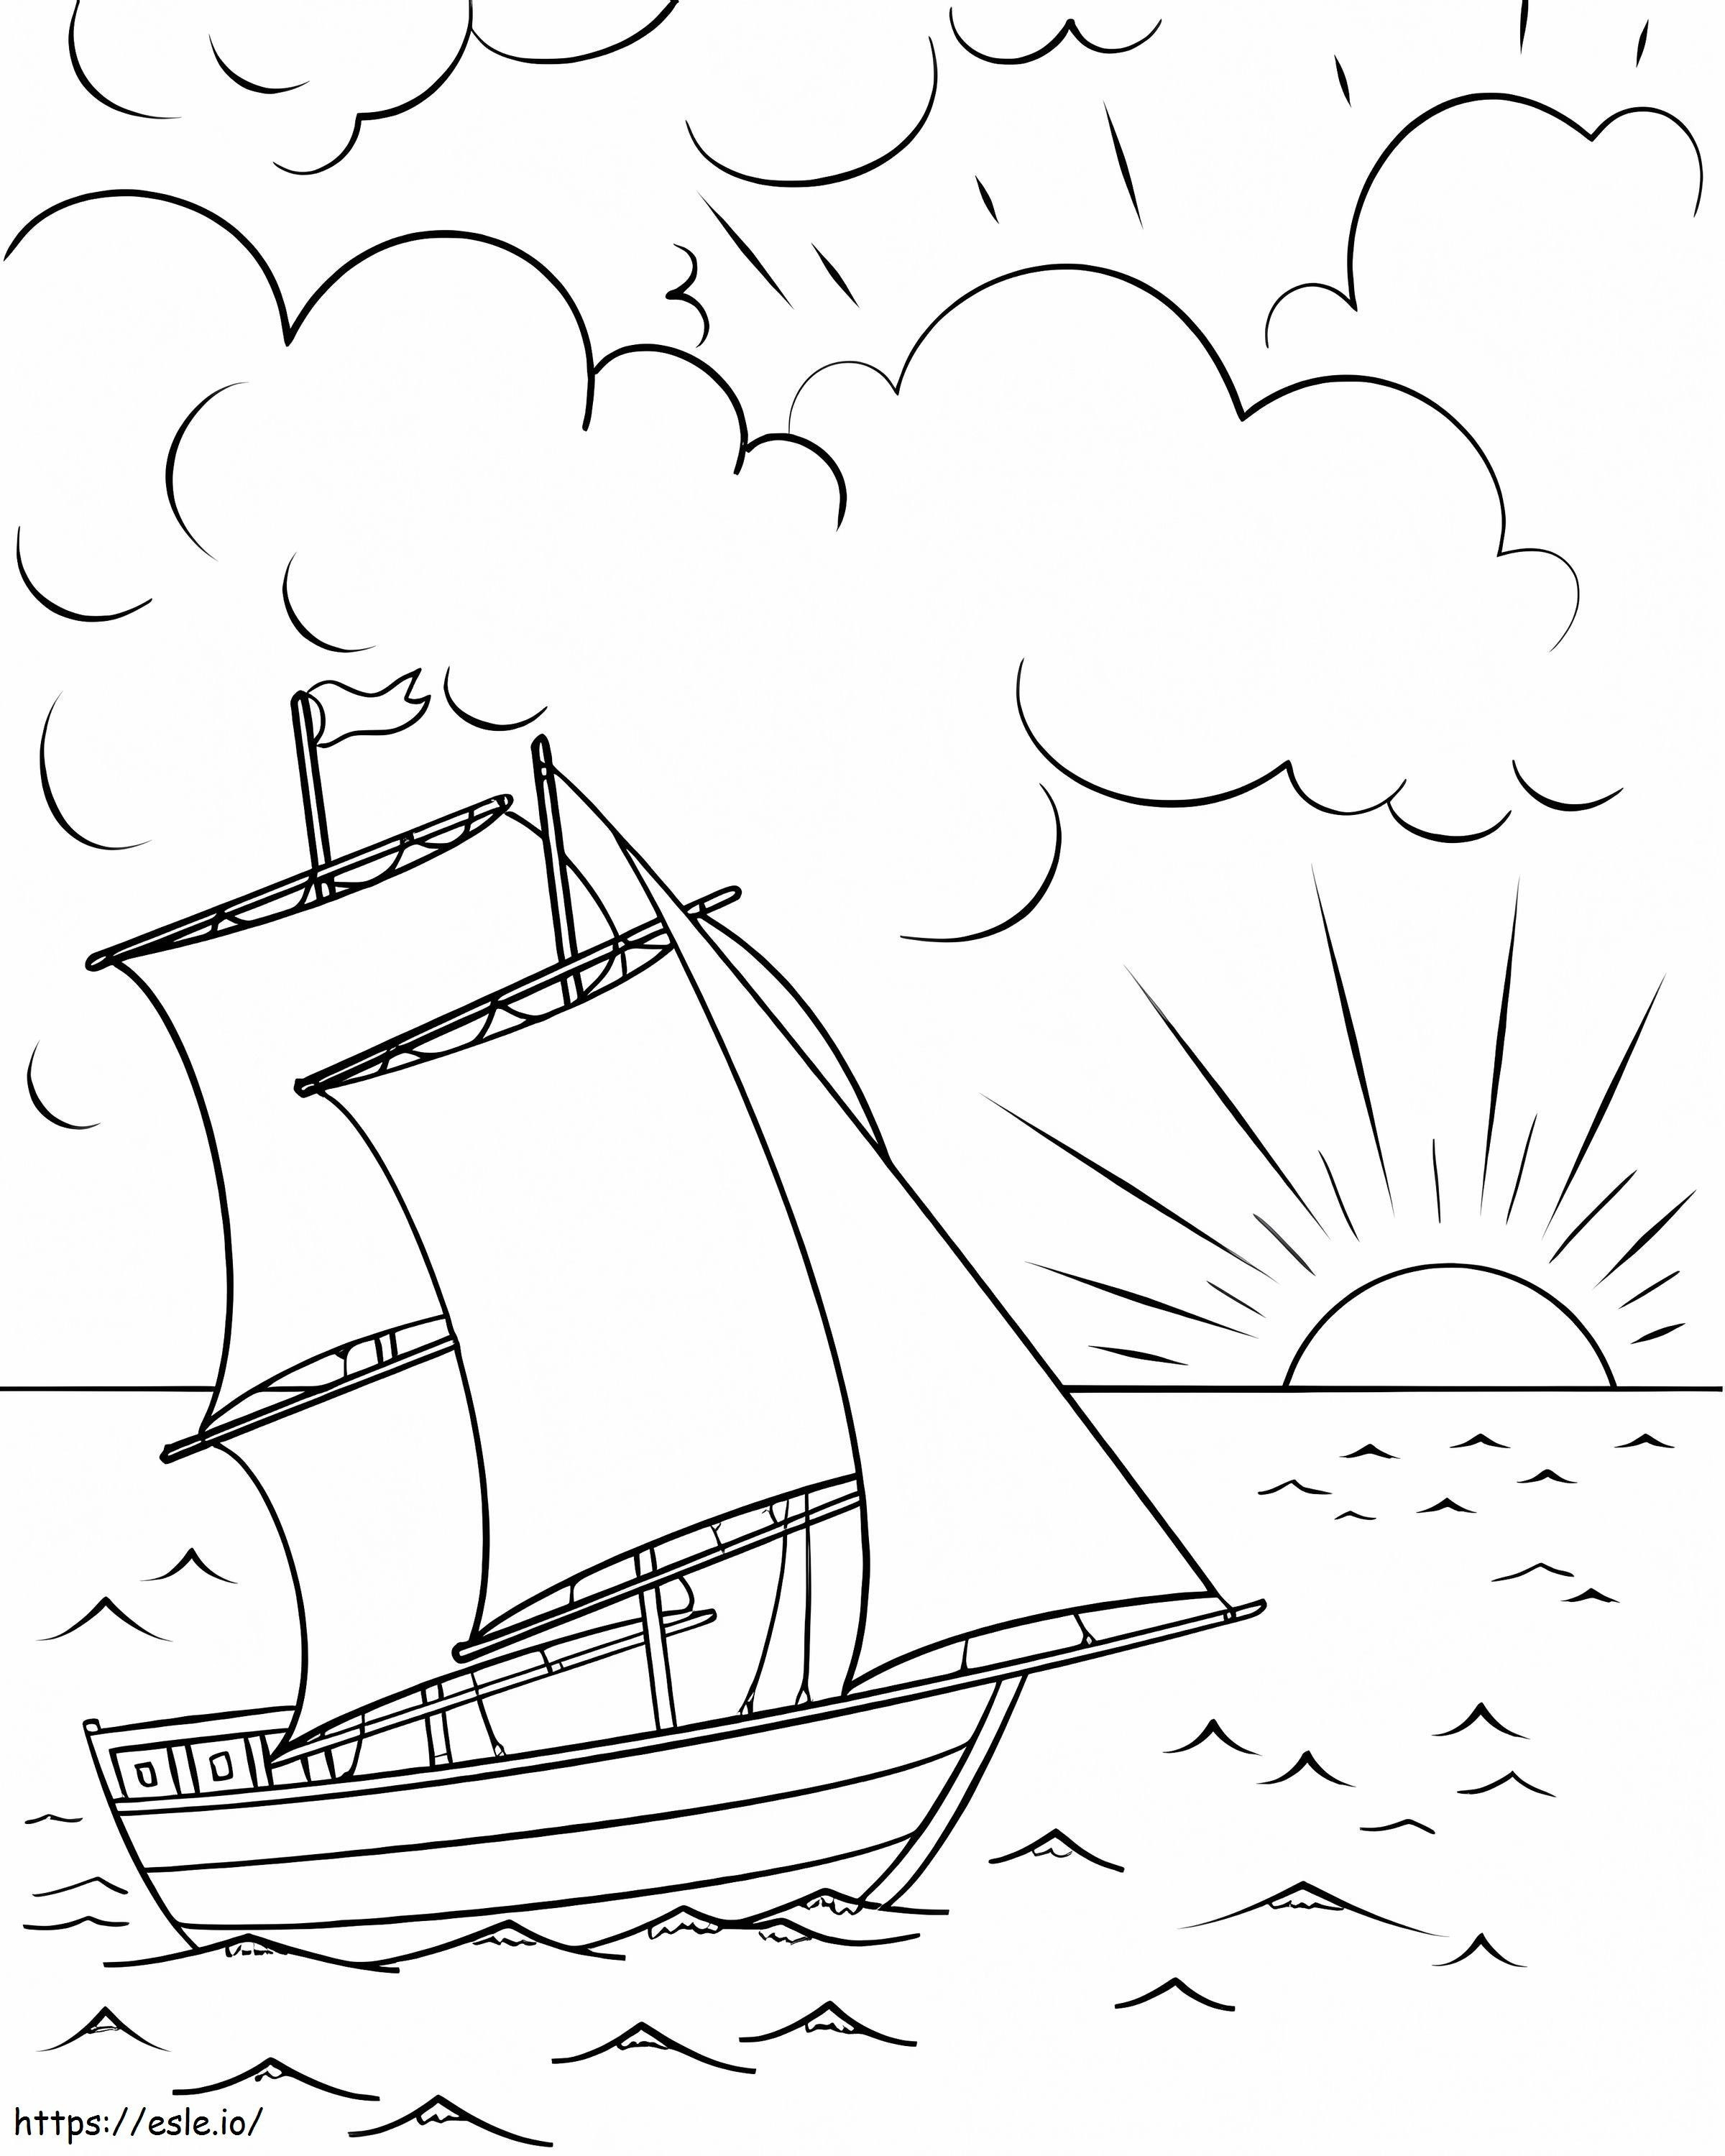 Boat And Sunset coloring page